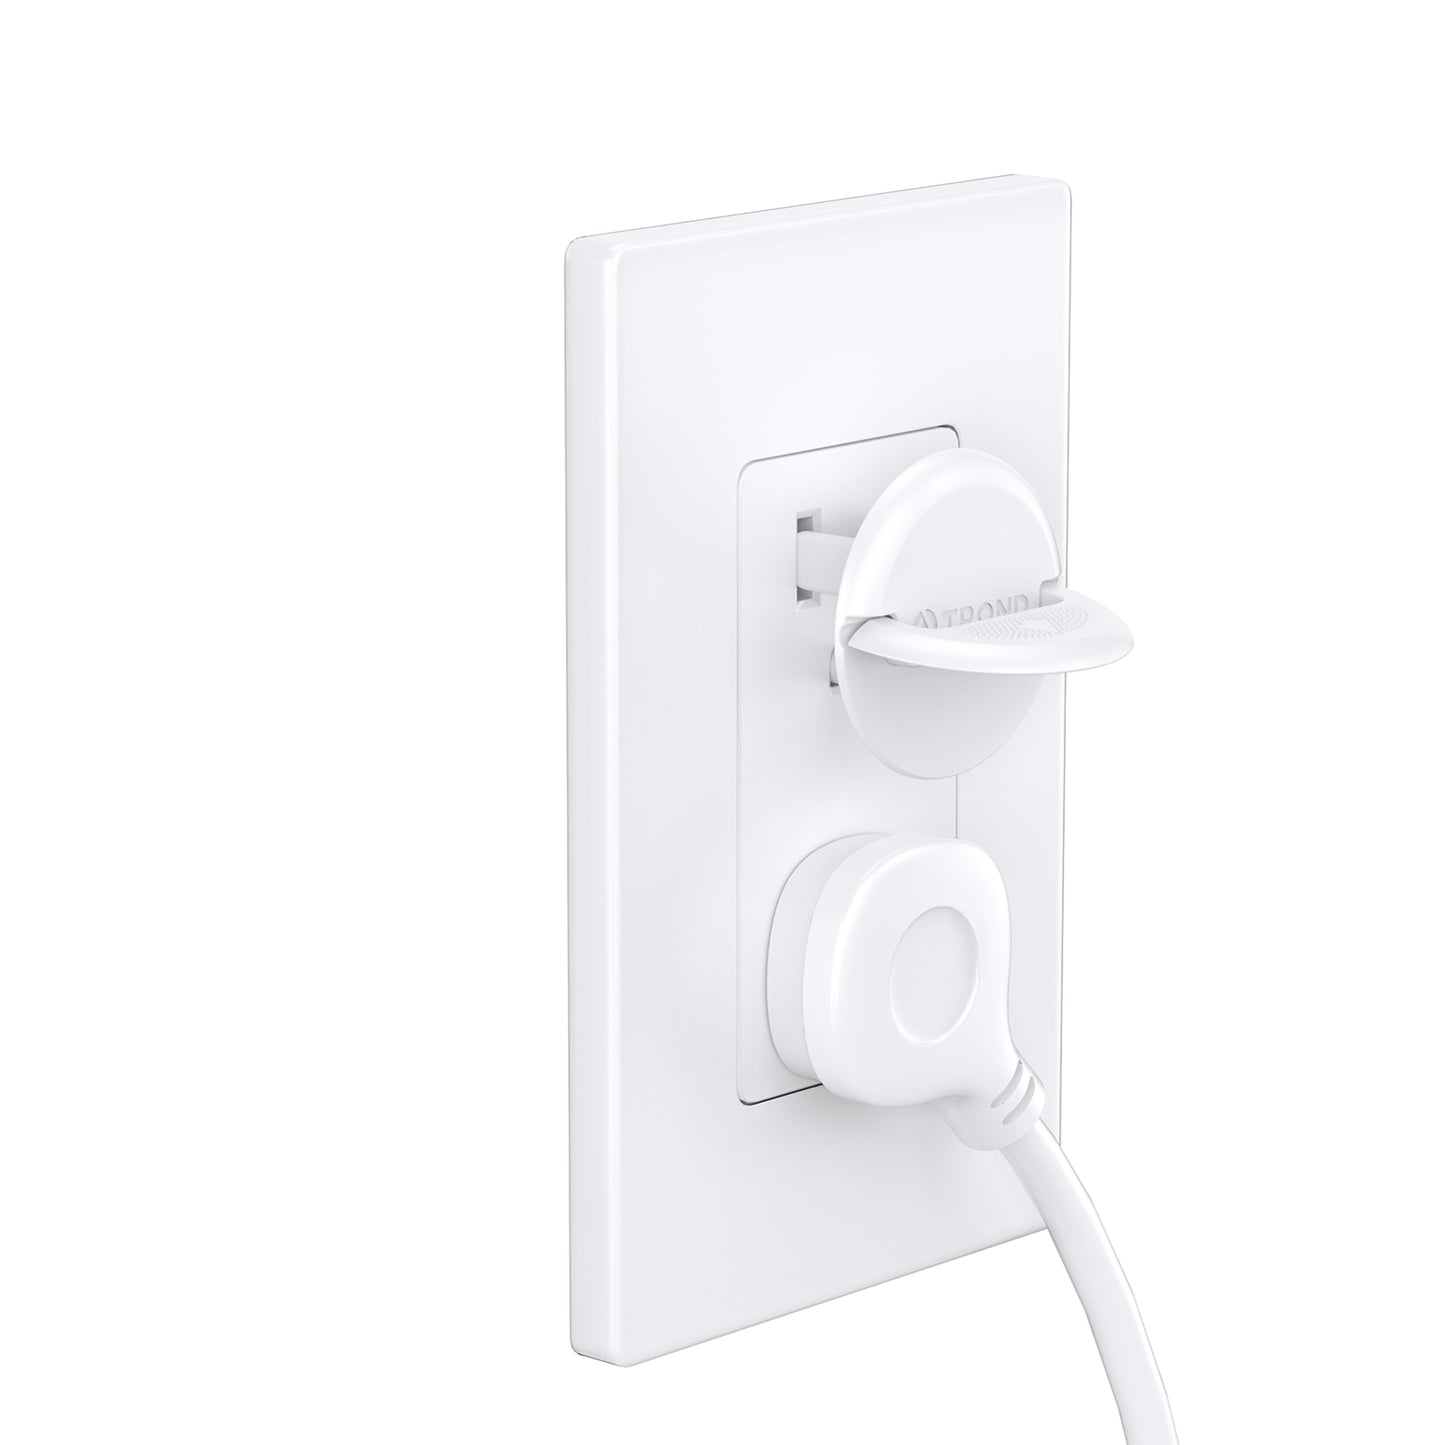 Outlet Covers Baby Proofing, 32 Pack, Plug Covers with Hidden Pull Handle